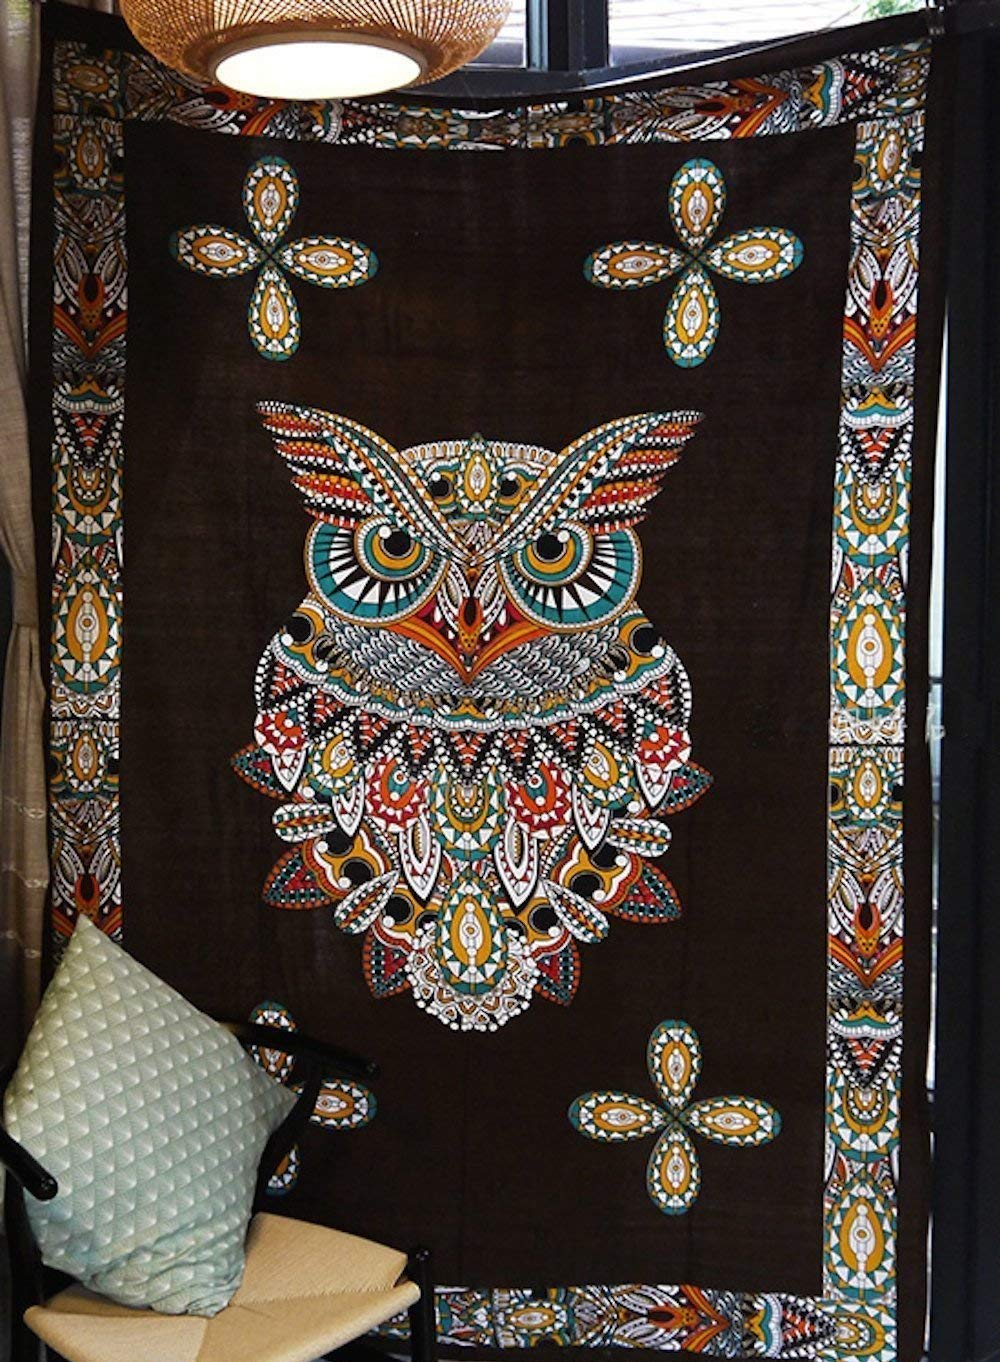 Psychedelic Owl Tapestry Black Owl Wall Decor Wall - Bohemia Mandala Tapestry Totem Owl Wall Tapestry Beach - HD Wallpaper 